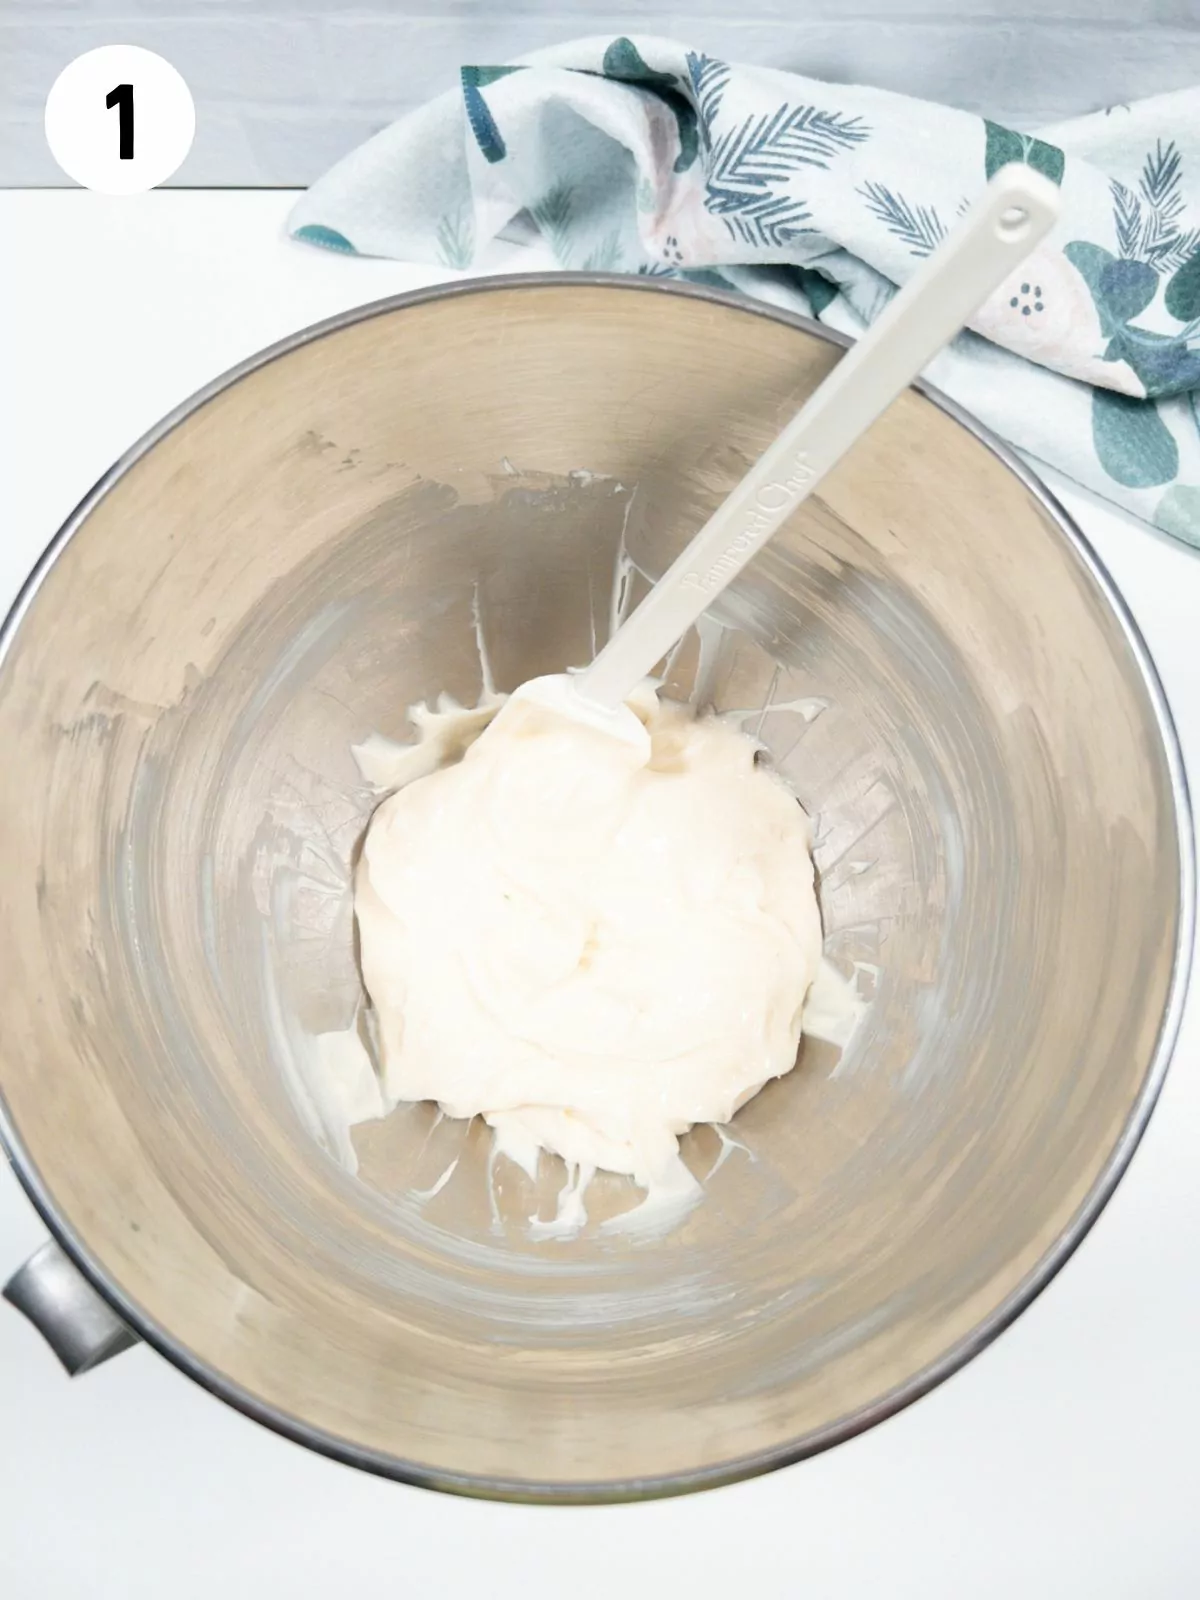 Cream cheese mixture in bowl.